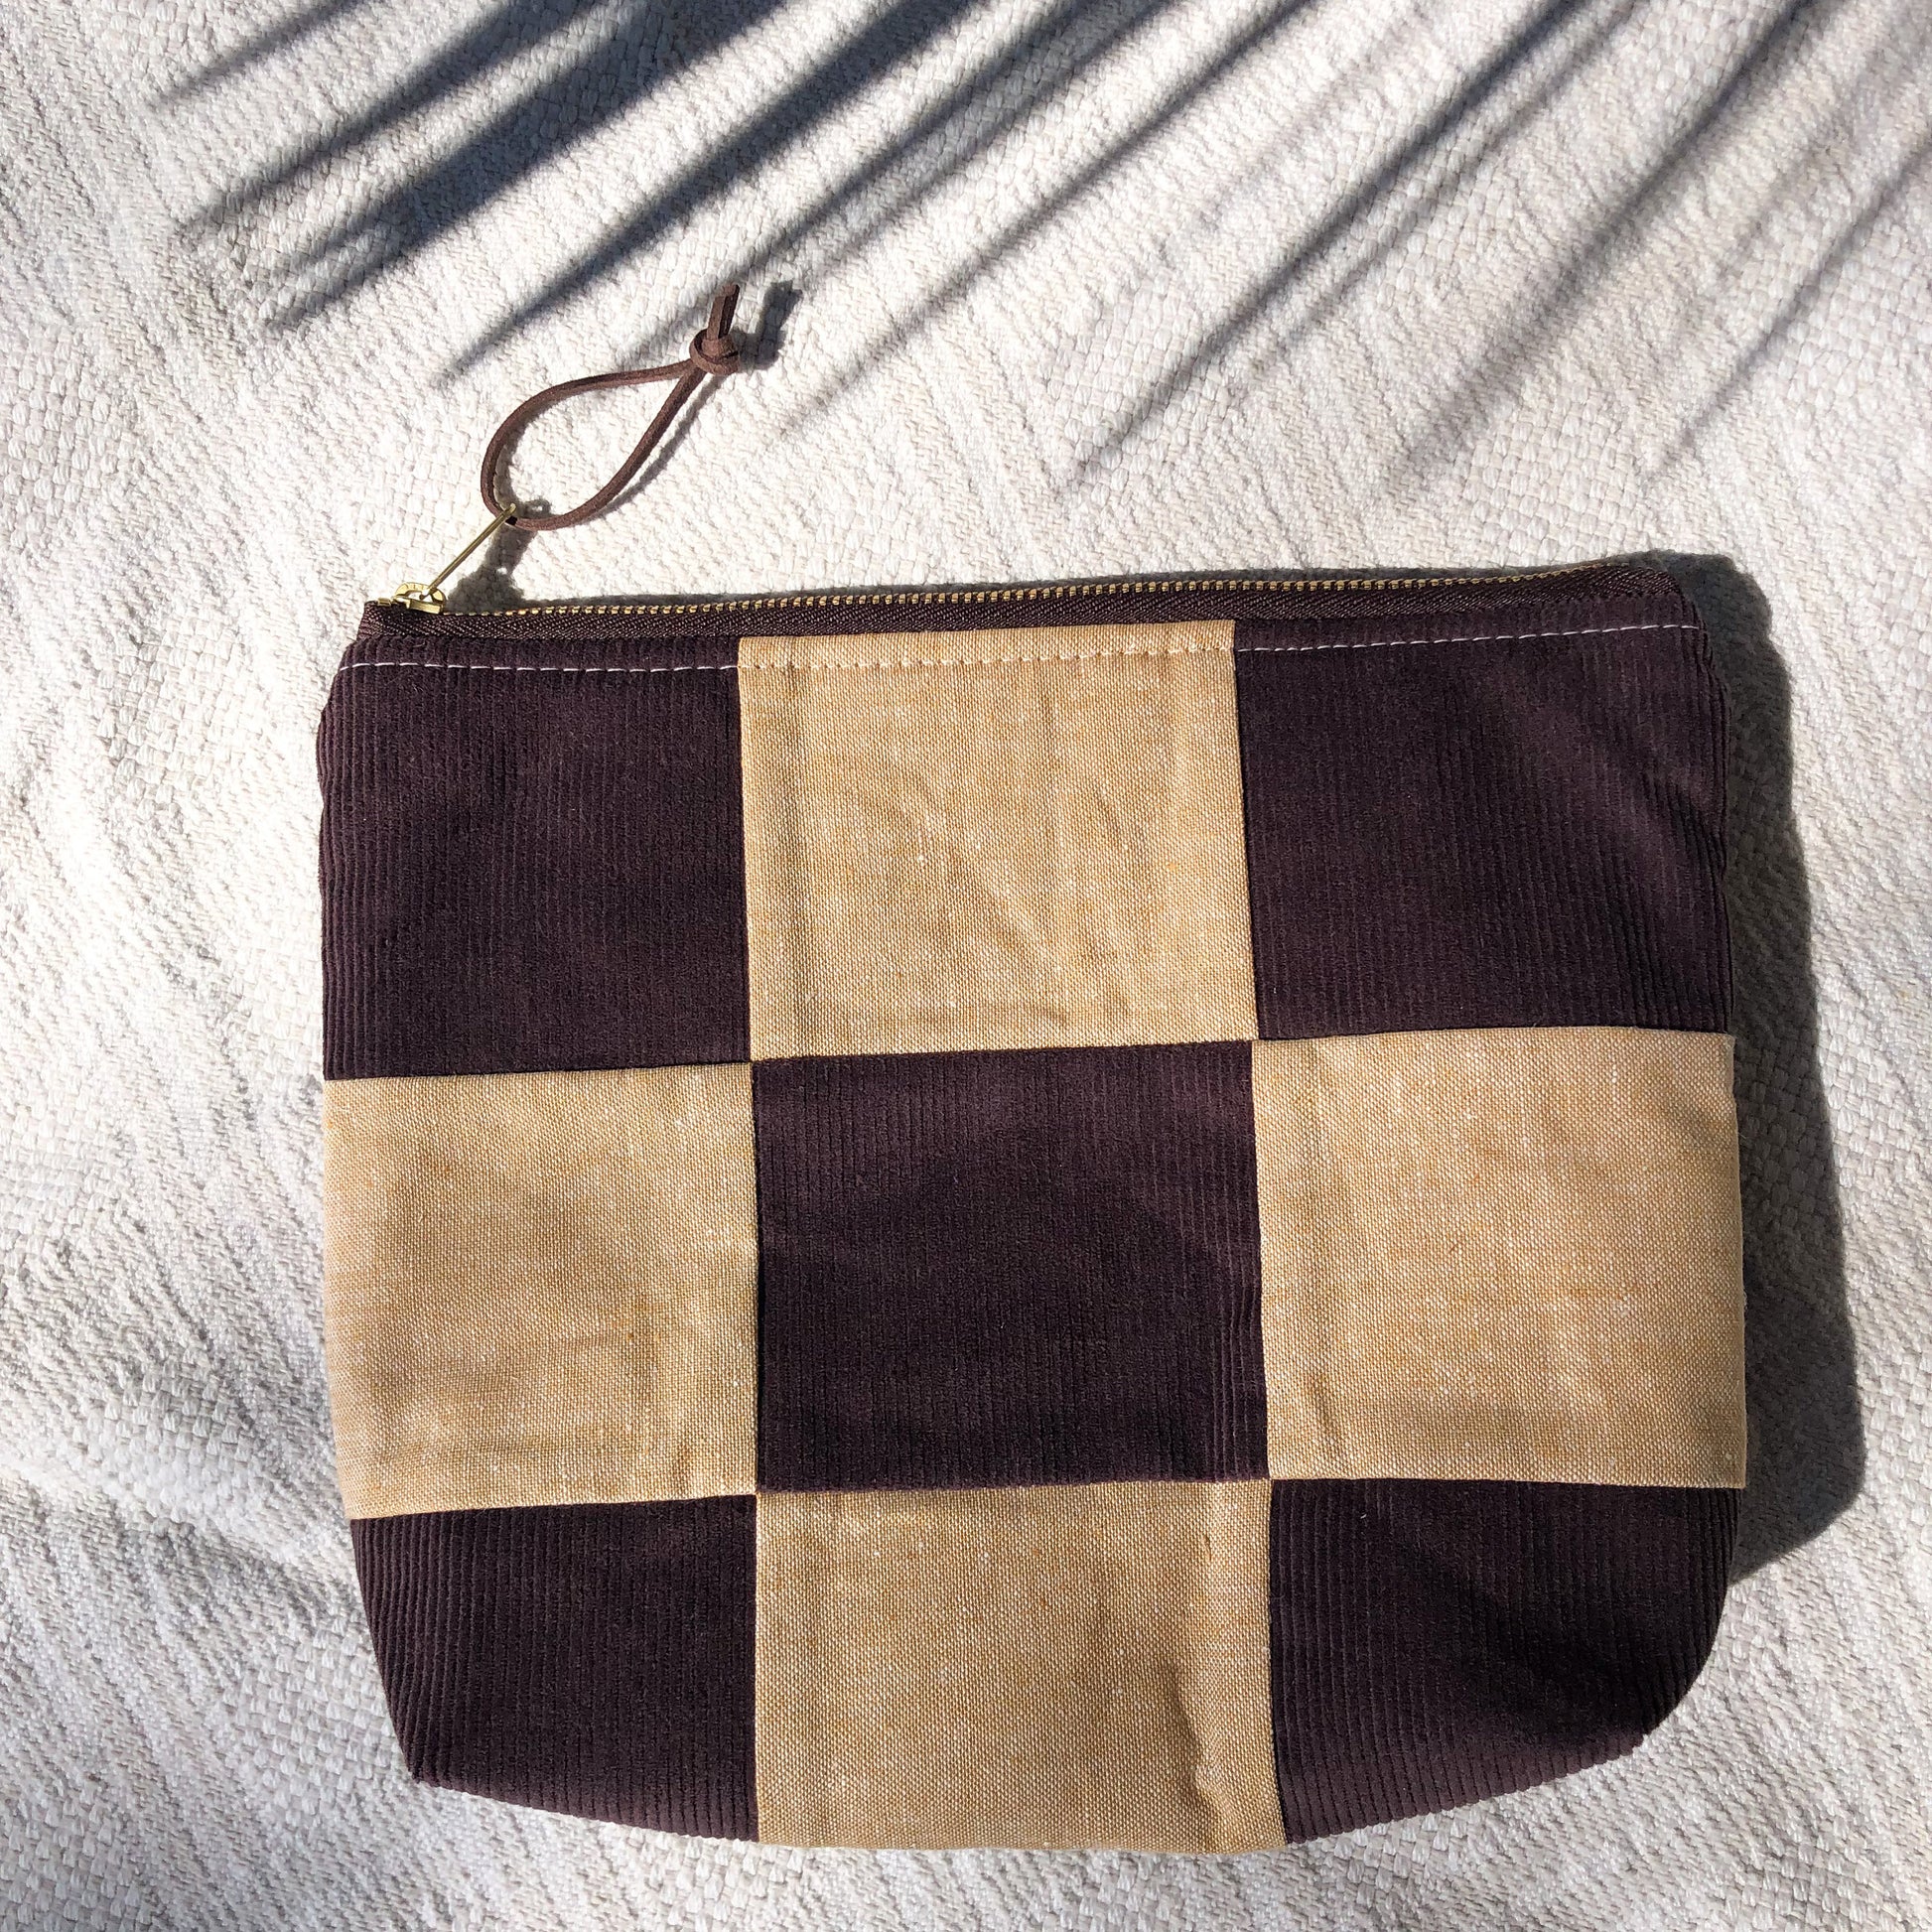 Checkered Bag, Patchwork Zipper Pouch, Corduroy Make up Bag, Back to School Pencil Holder, Fabric Toiletry Pouch, Organizer Gifts for Her